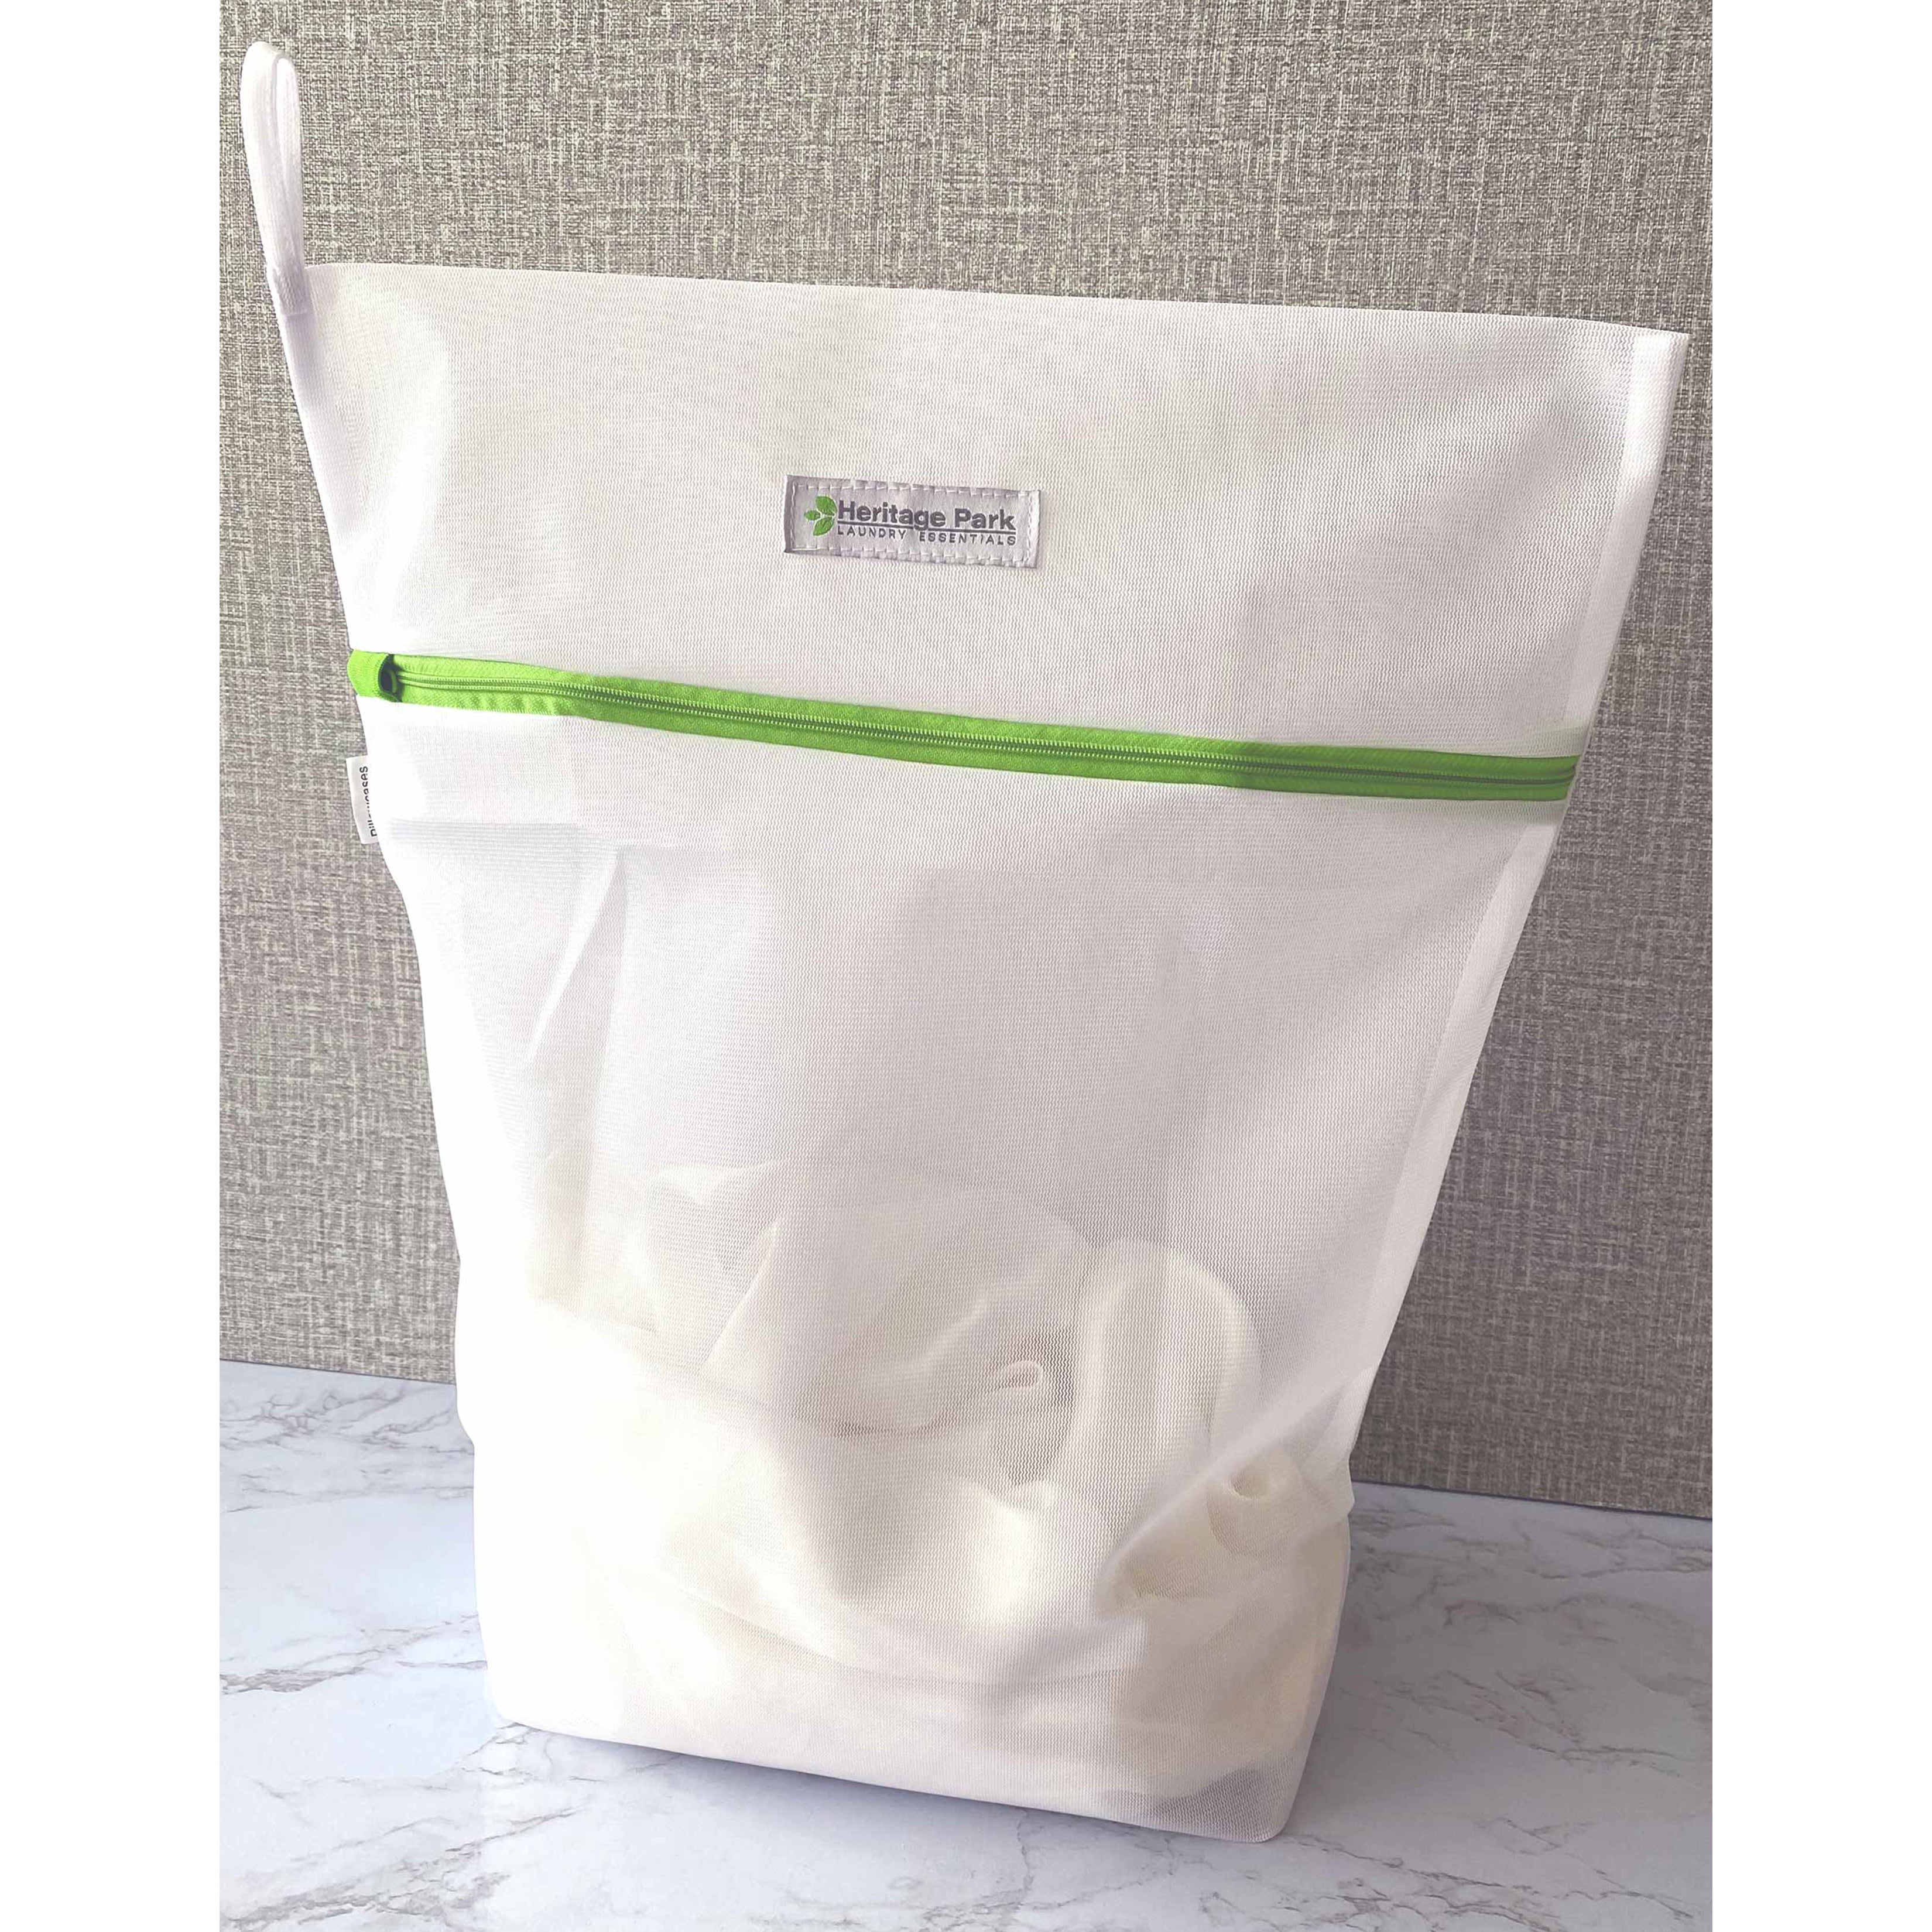 Mesh Laundry Bag Eco-friendly Safety Protection Mesh Underwear Laundry Bag